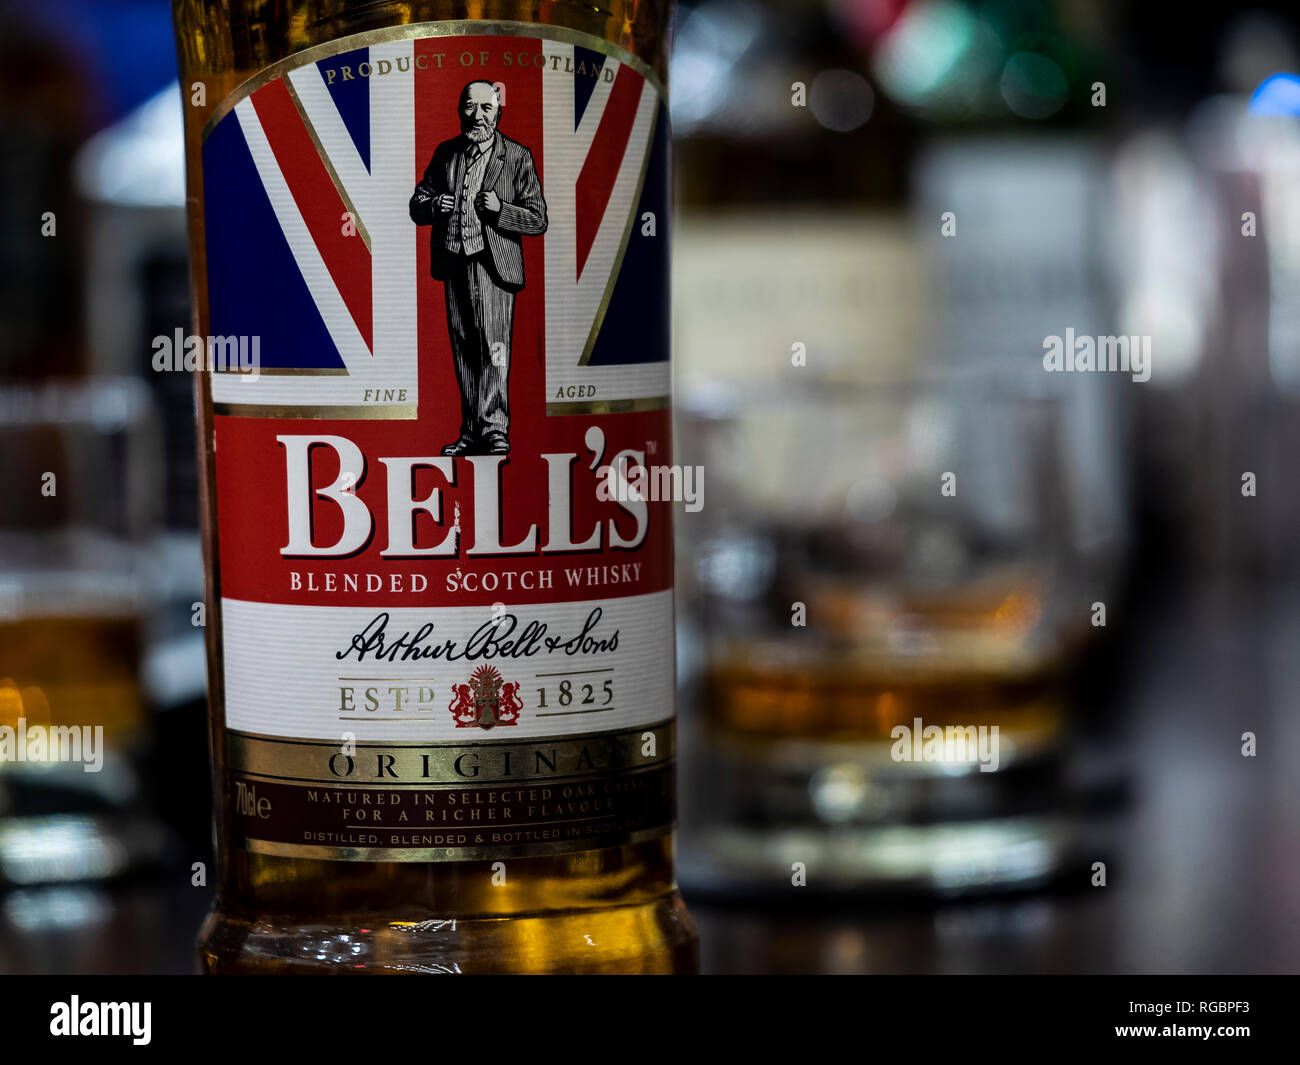 Bell's Scotch Whisky seen at the bar counter Stock Photo - Alamy